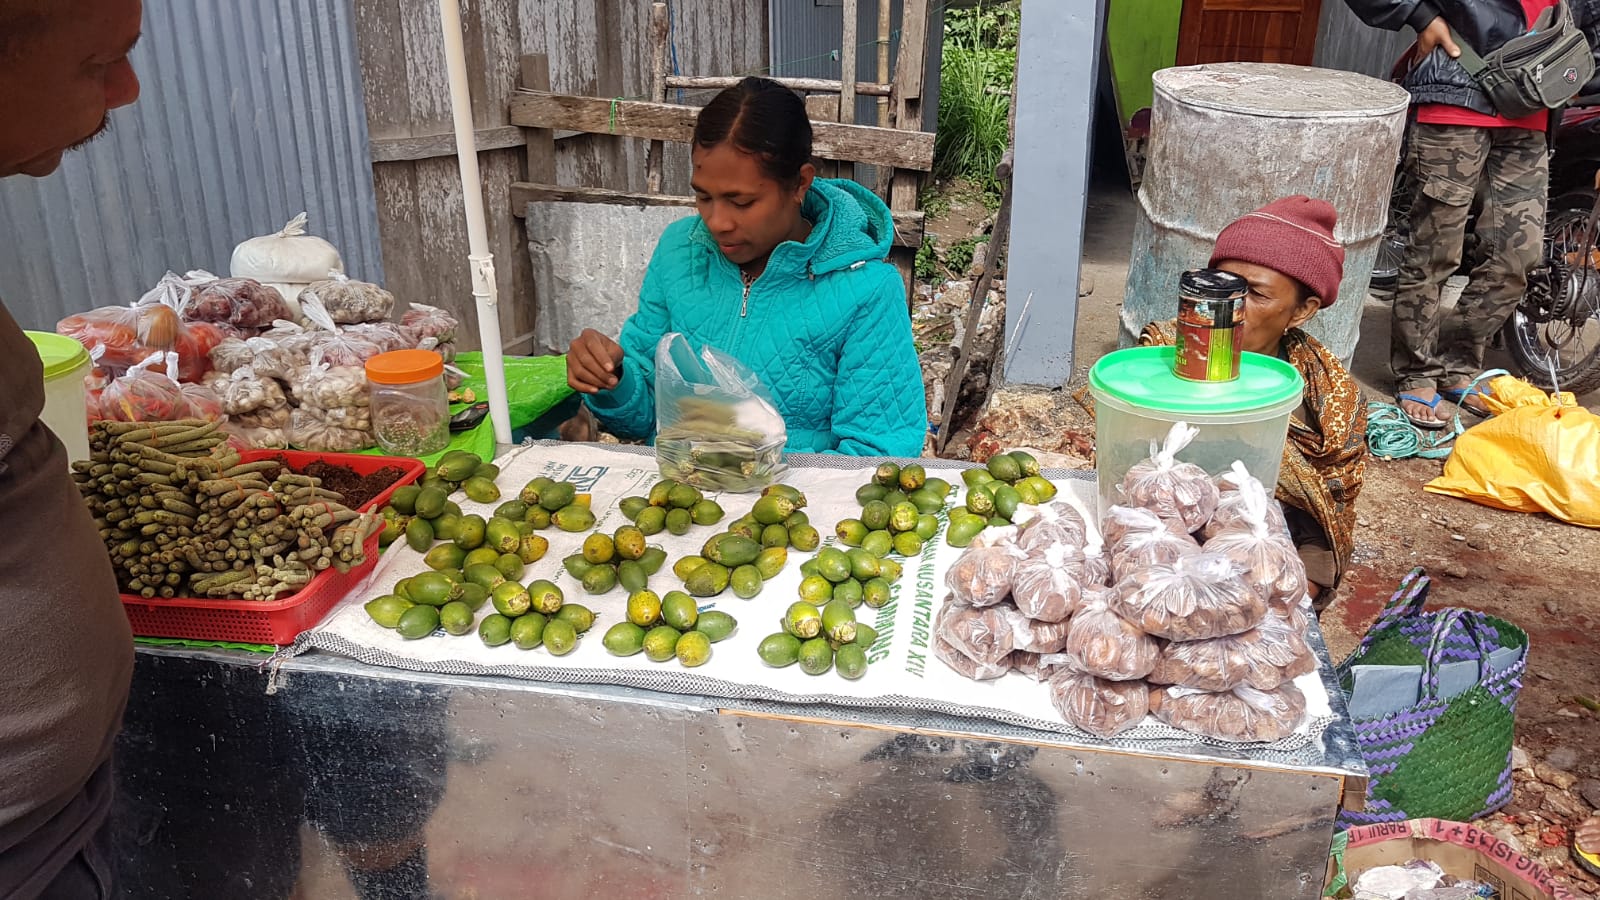 Buying bettlenuts to offer the village in West Timor